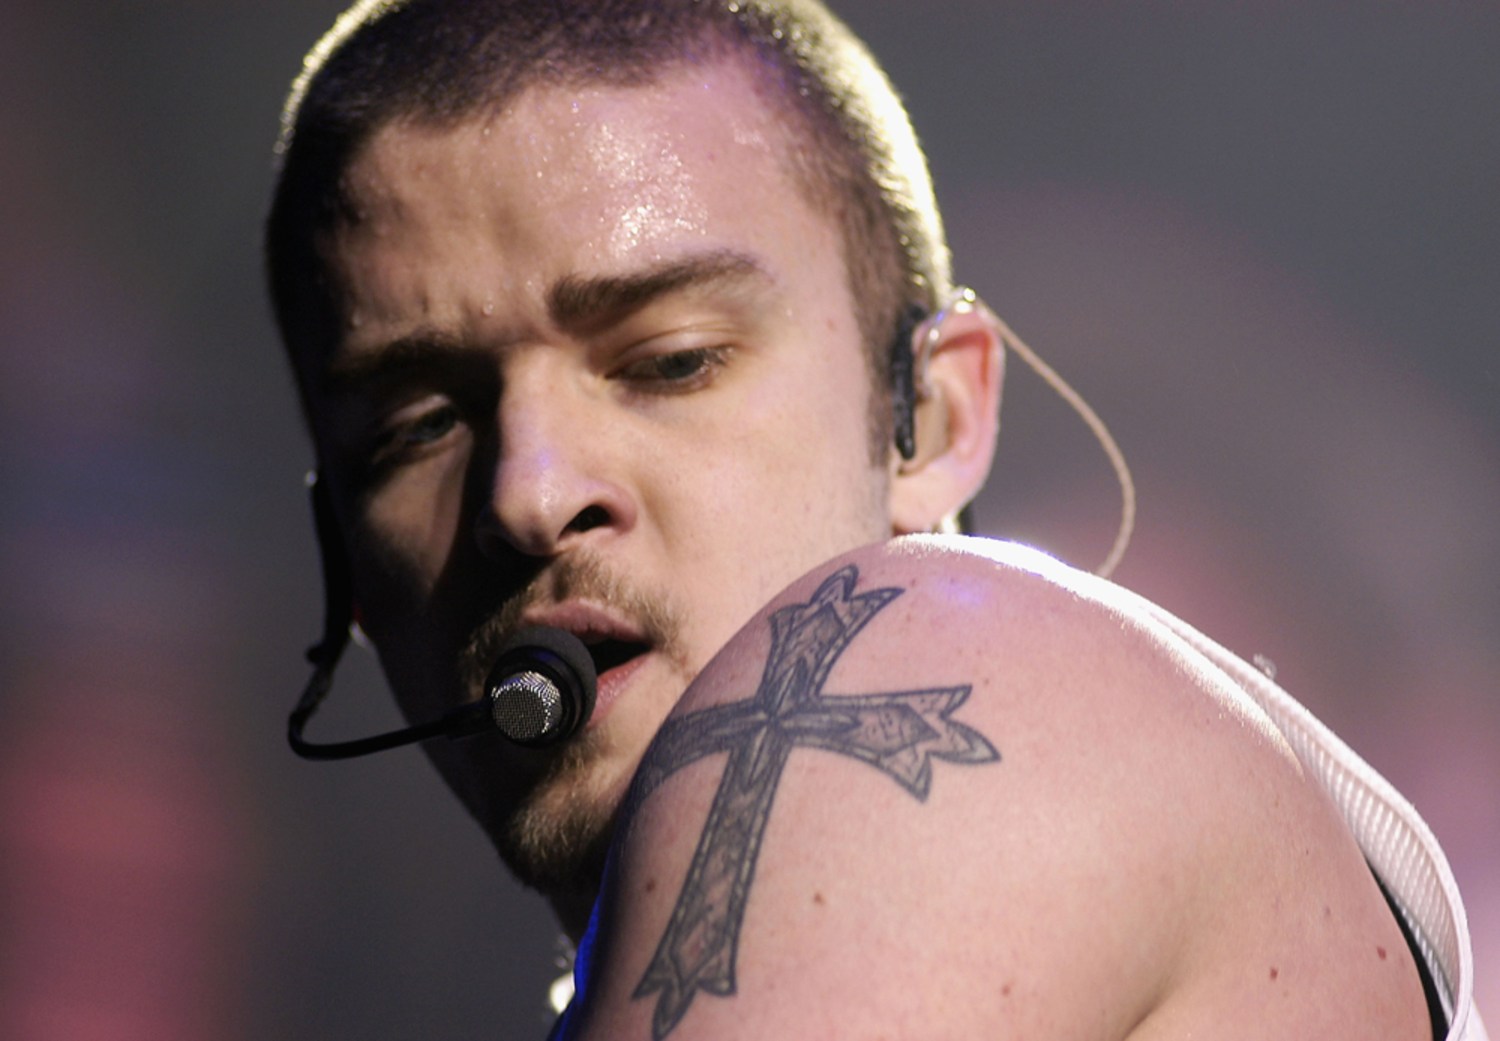 Justin Timberlake Tattoo Designs With Pictures And Explanation